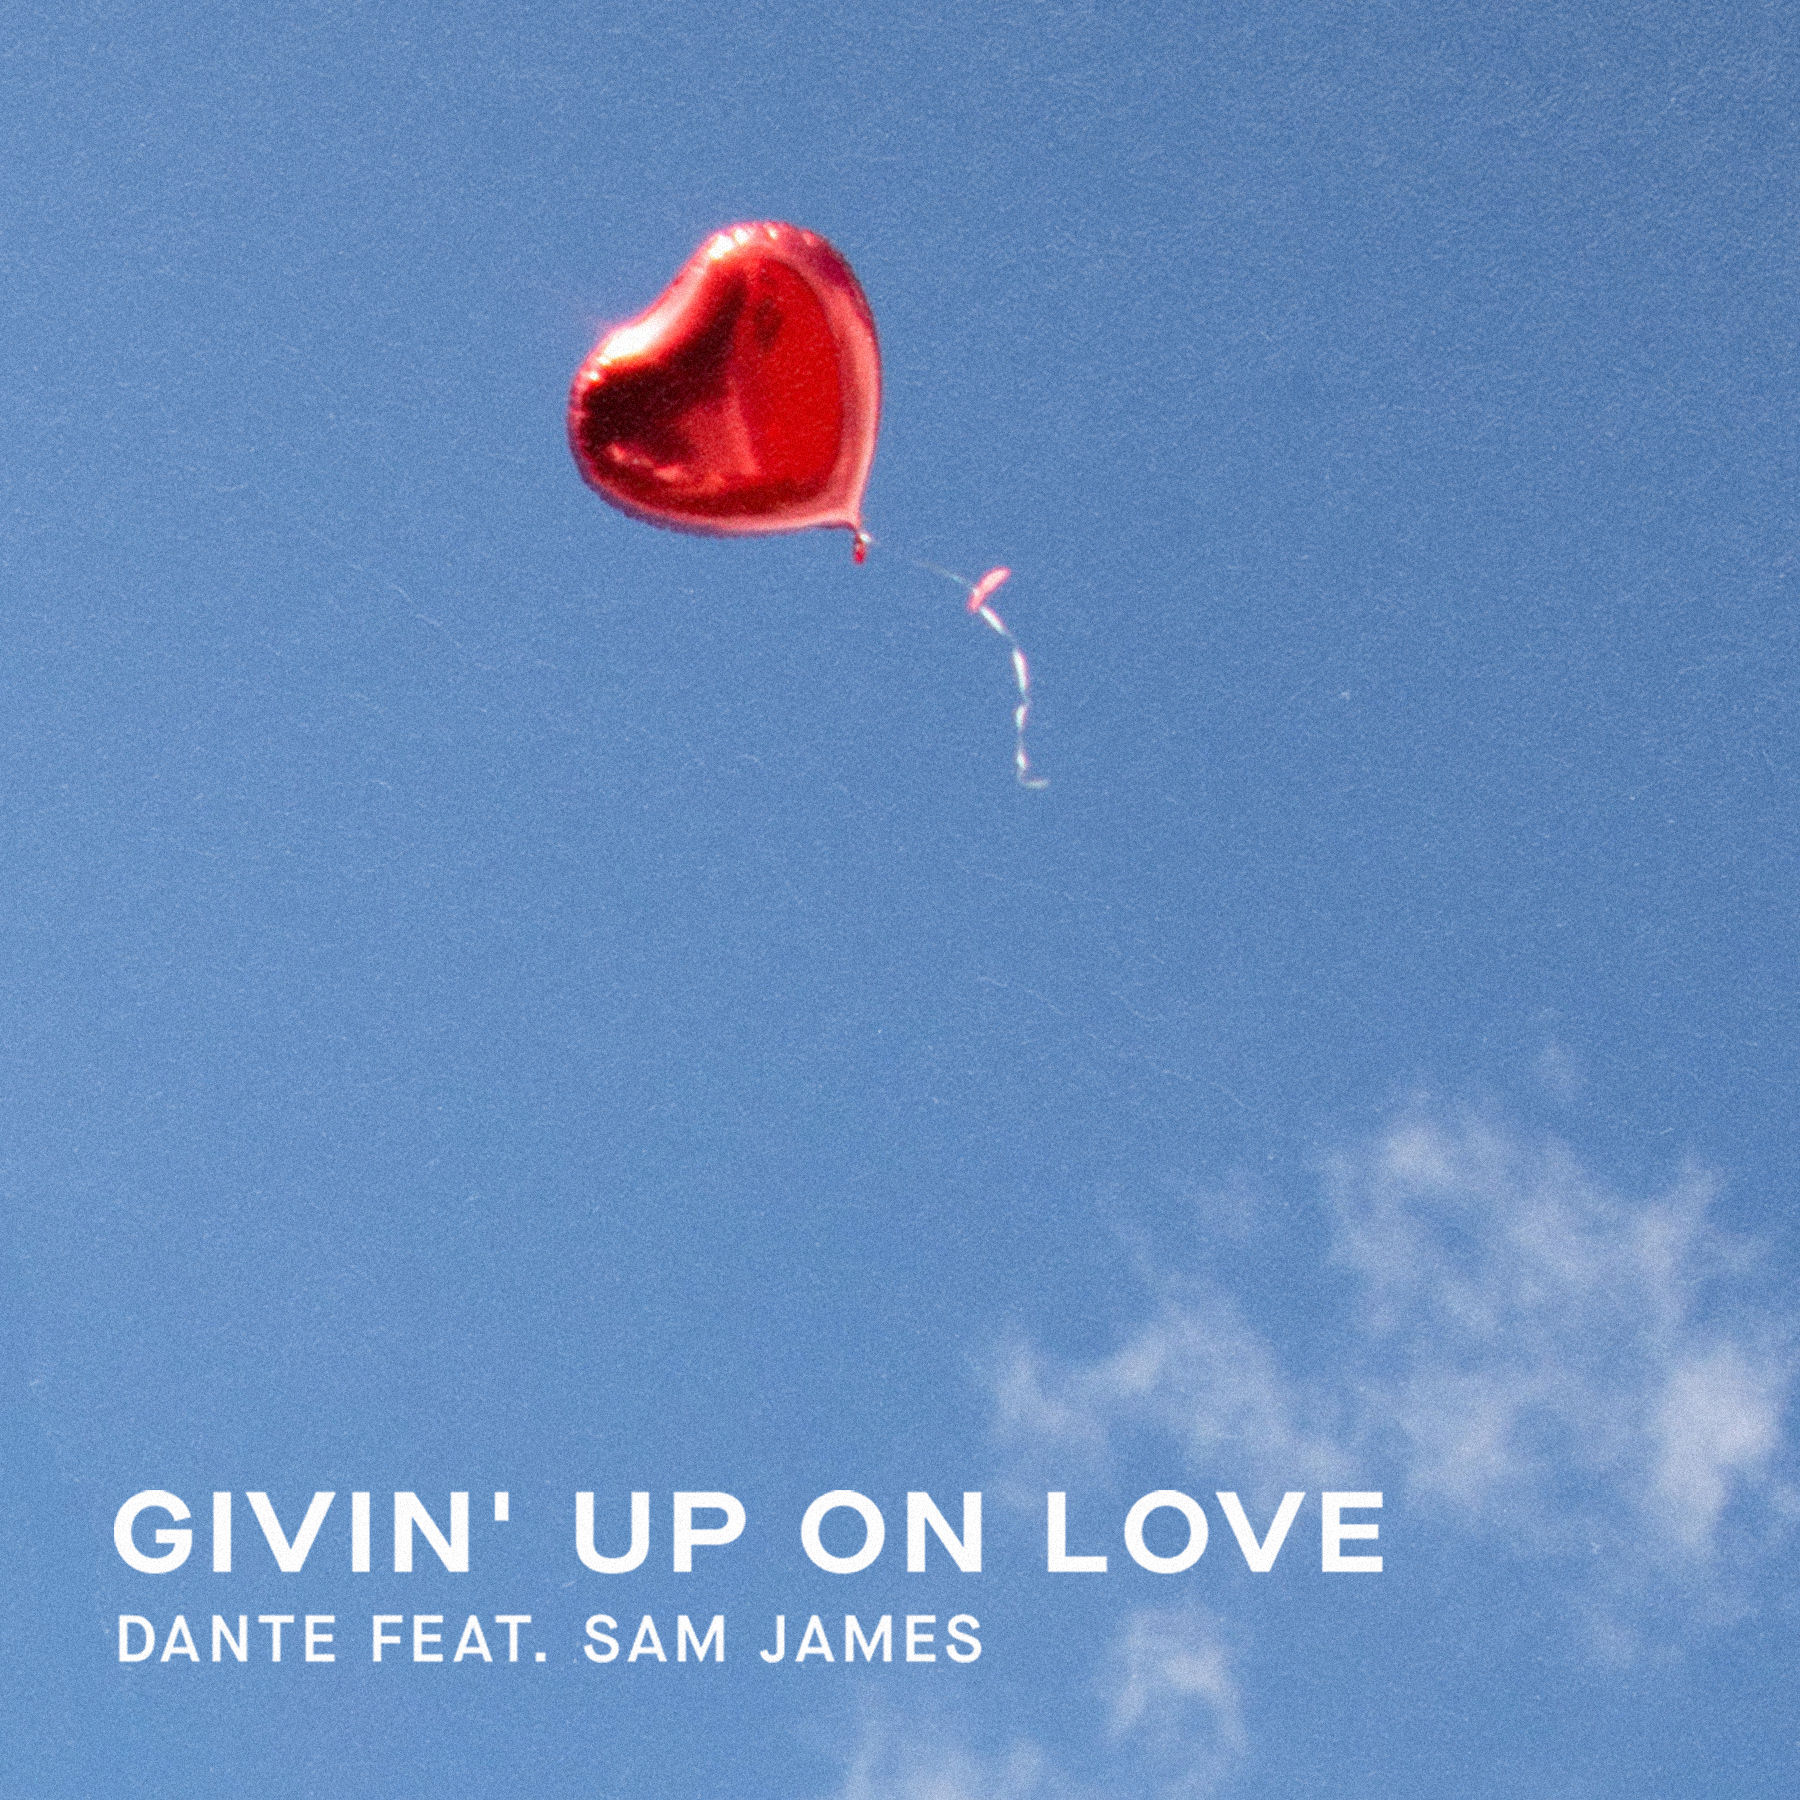 Dante Shows Why He Is A Force In The Industry With Powerful Electronic Single  ‘Givin’ Up On Love’ Featuring Sam James